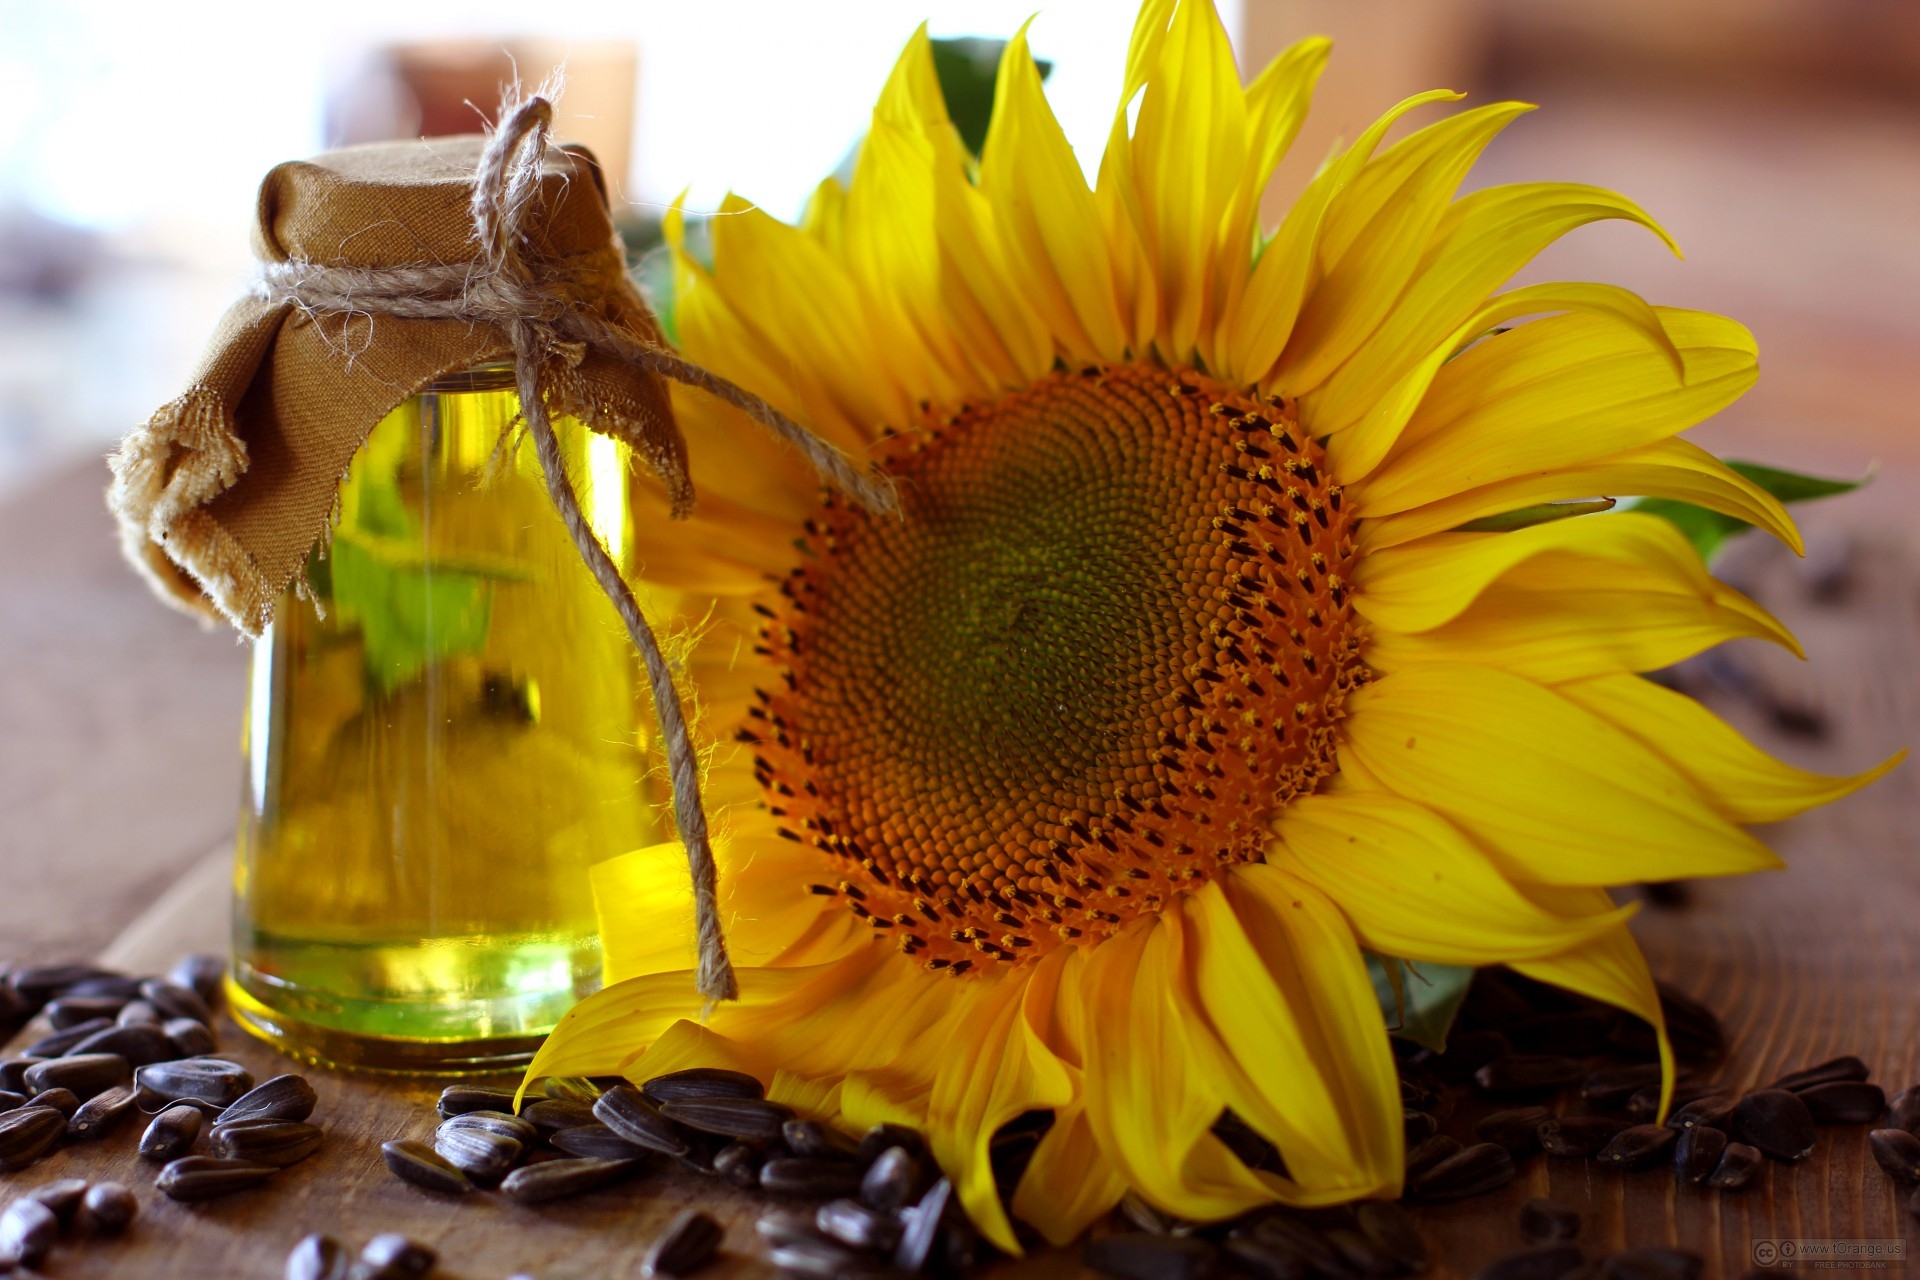 The Turkish agency TMO canceled the purchase of sunflower oil, which increased the pressure on prices